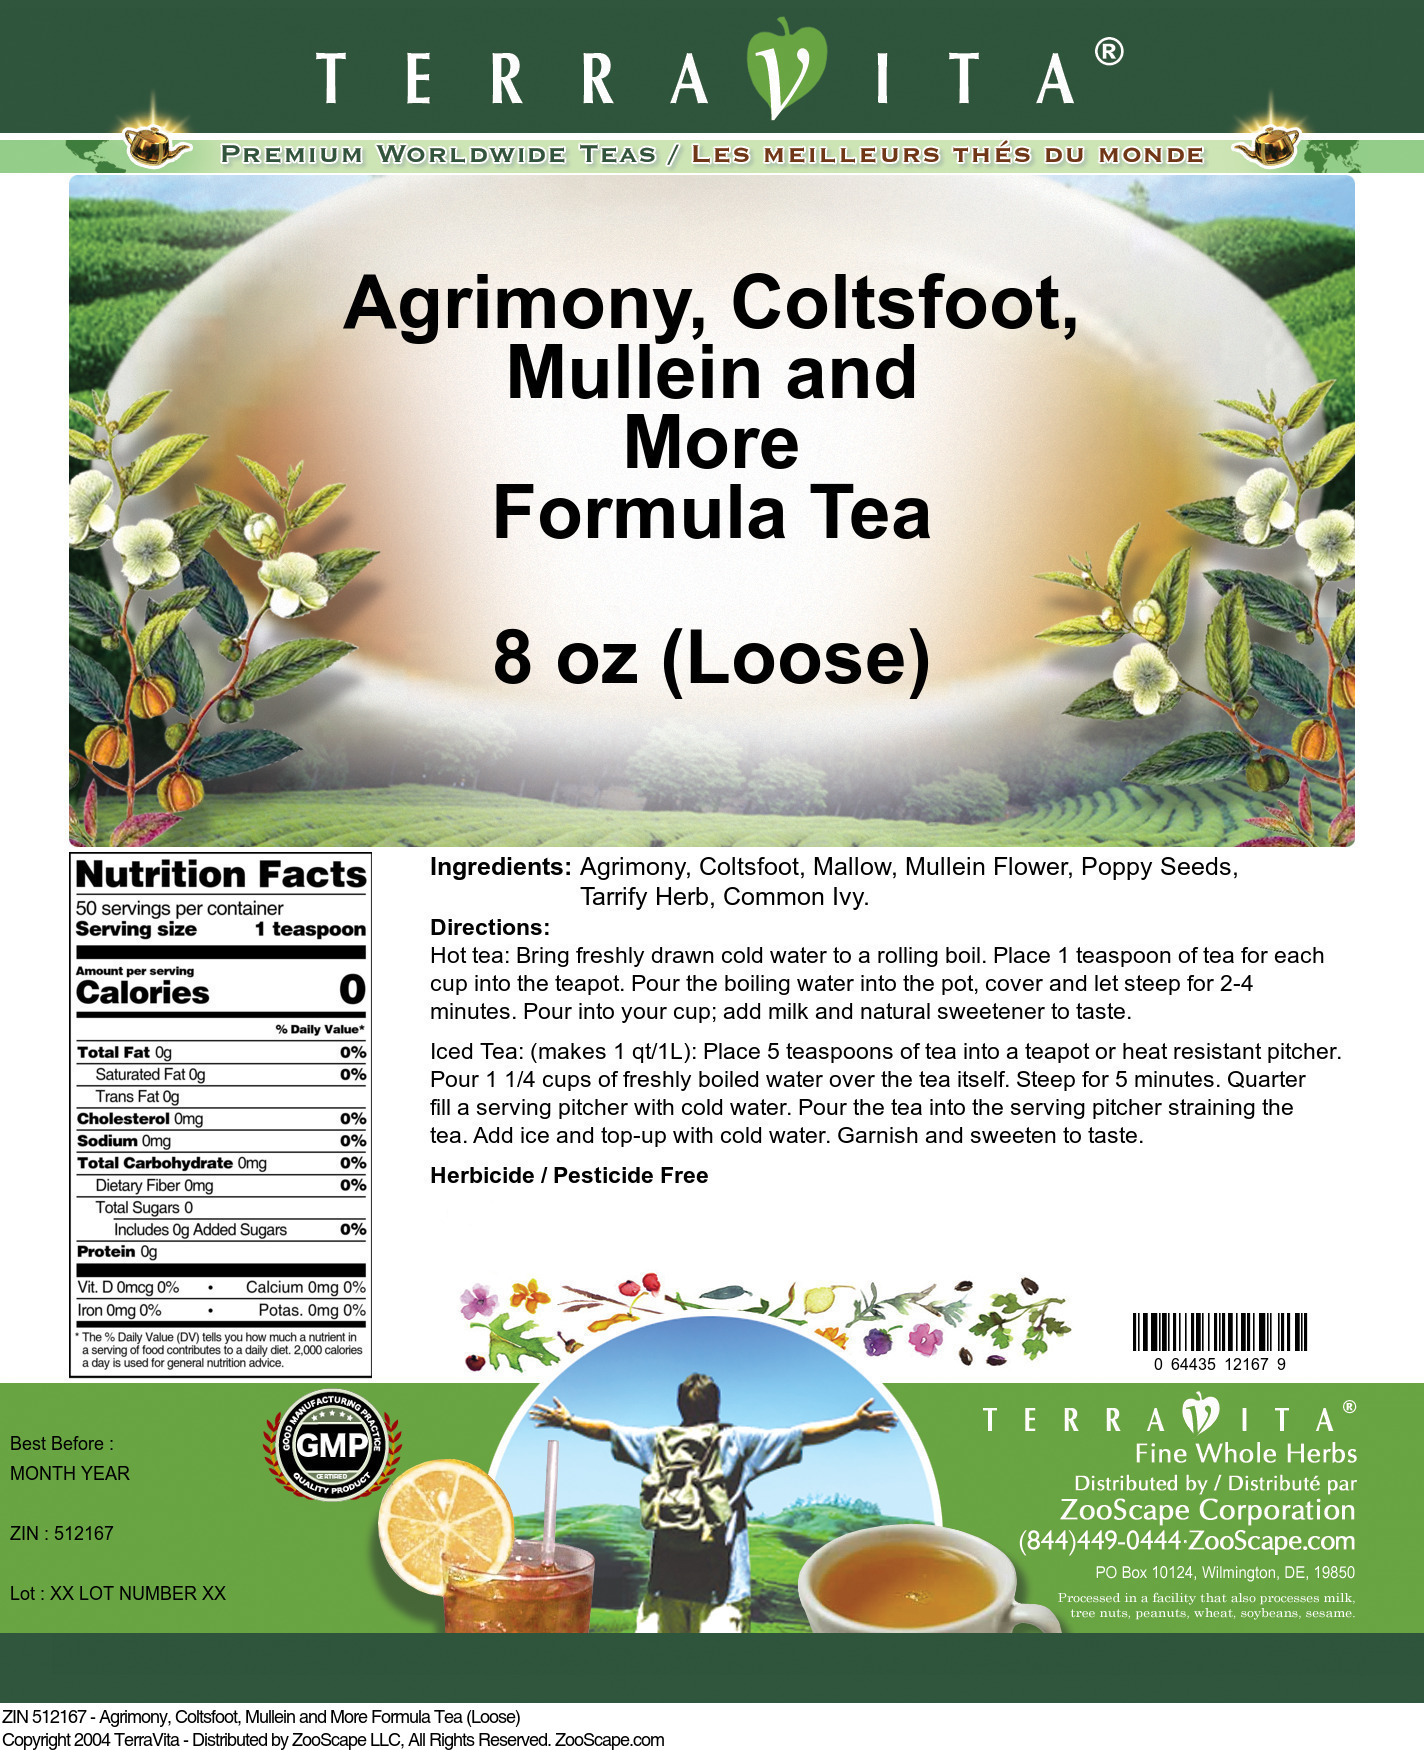 Agrimony, Coltsfoot, Mullein and More Formula Tea (Loose) - Label